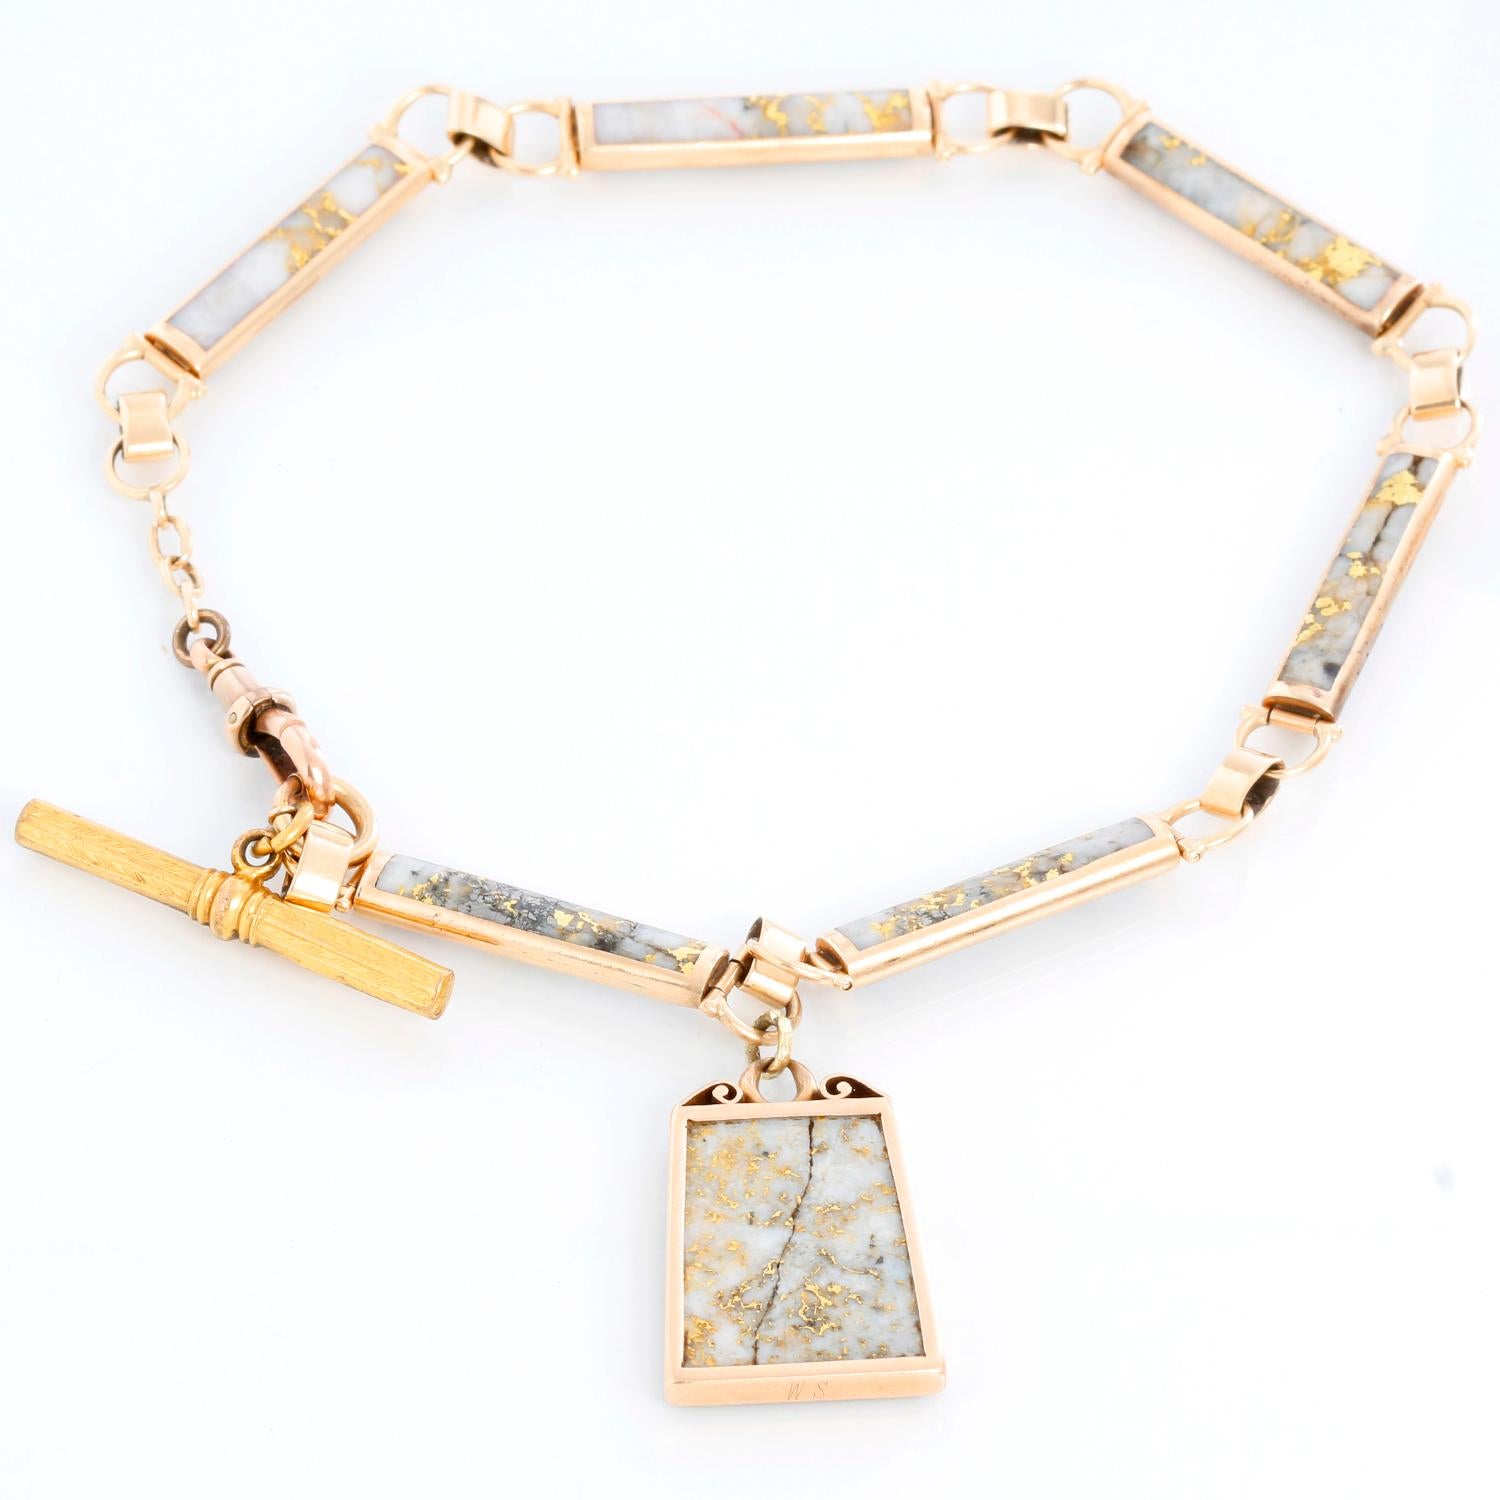 Victorian 14K Gold & Quartz Pocket Watch Chain - Beautiful design gold bearing quartz chain. Circa 1900's. Measuring 12.5 inches in overall length, containing 6 rectangular panels with gold quartz on each side and gold quartz set T bar. Overall